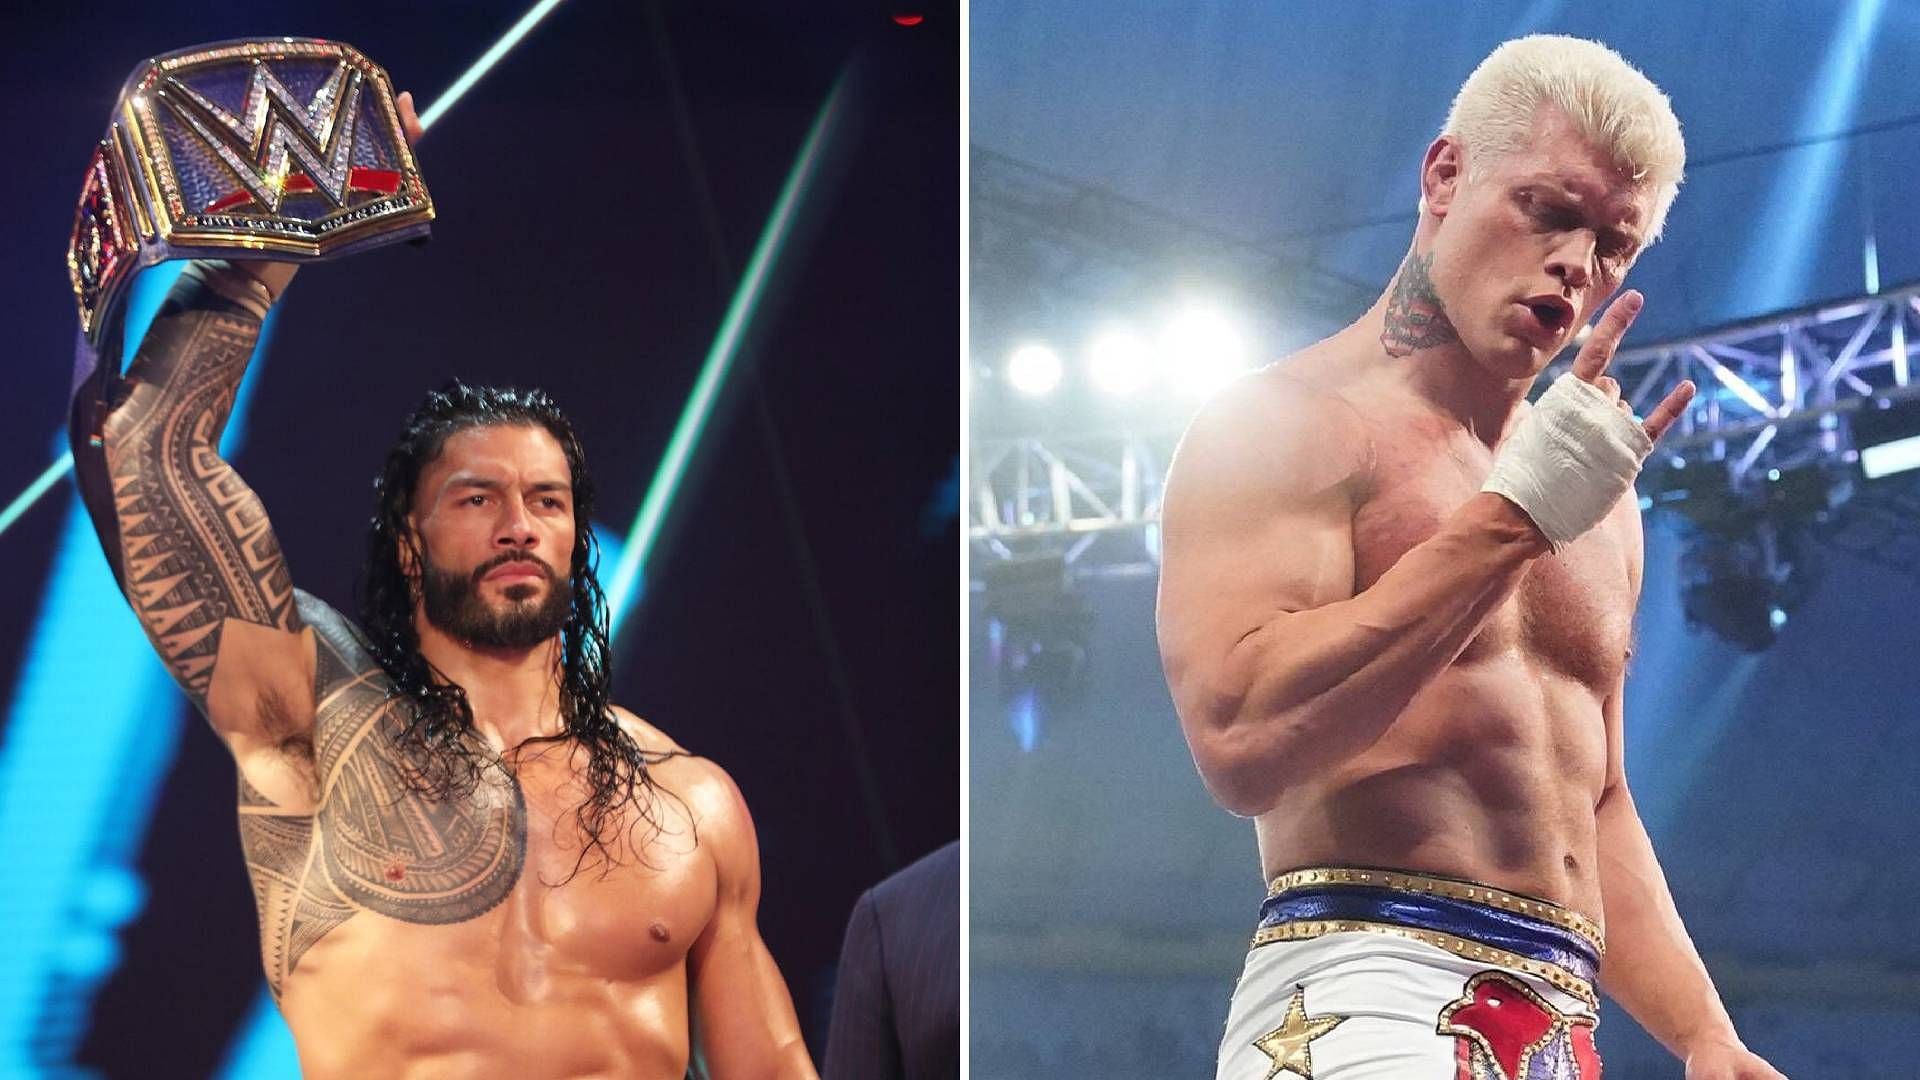 Roman Reigns and Cody Rhodes